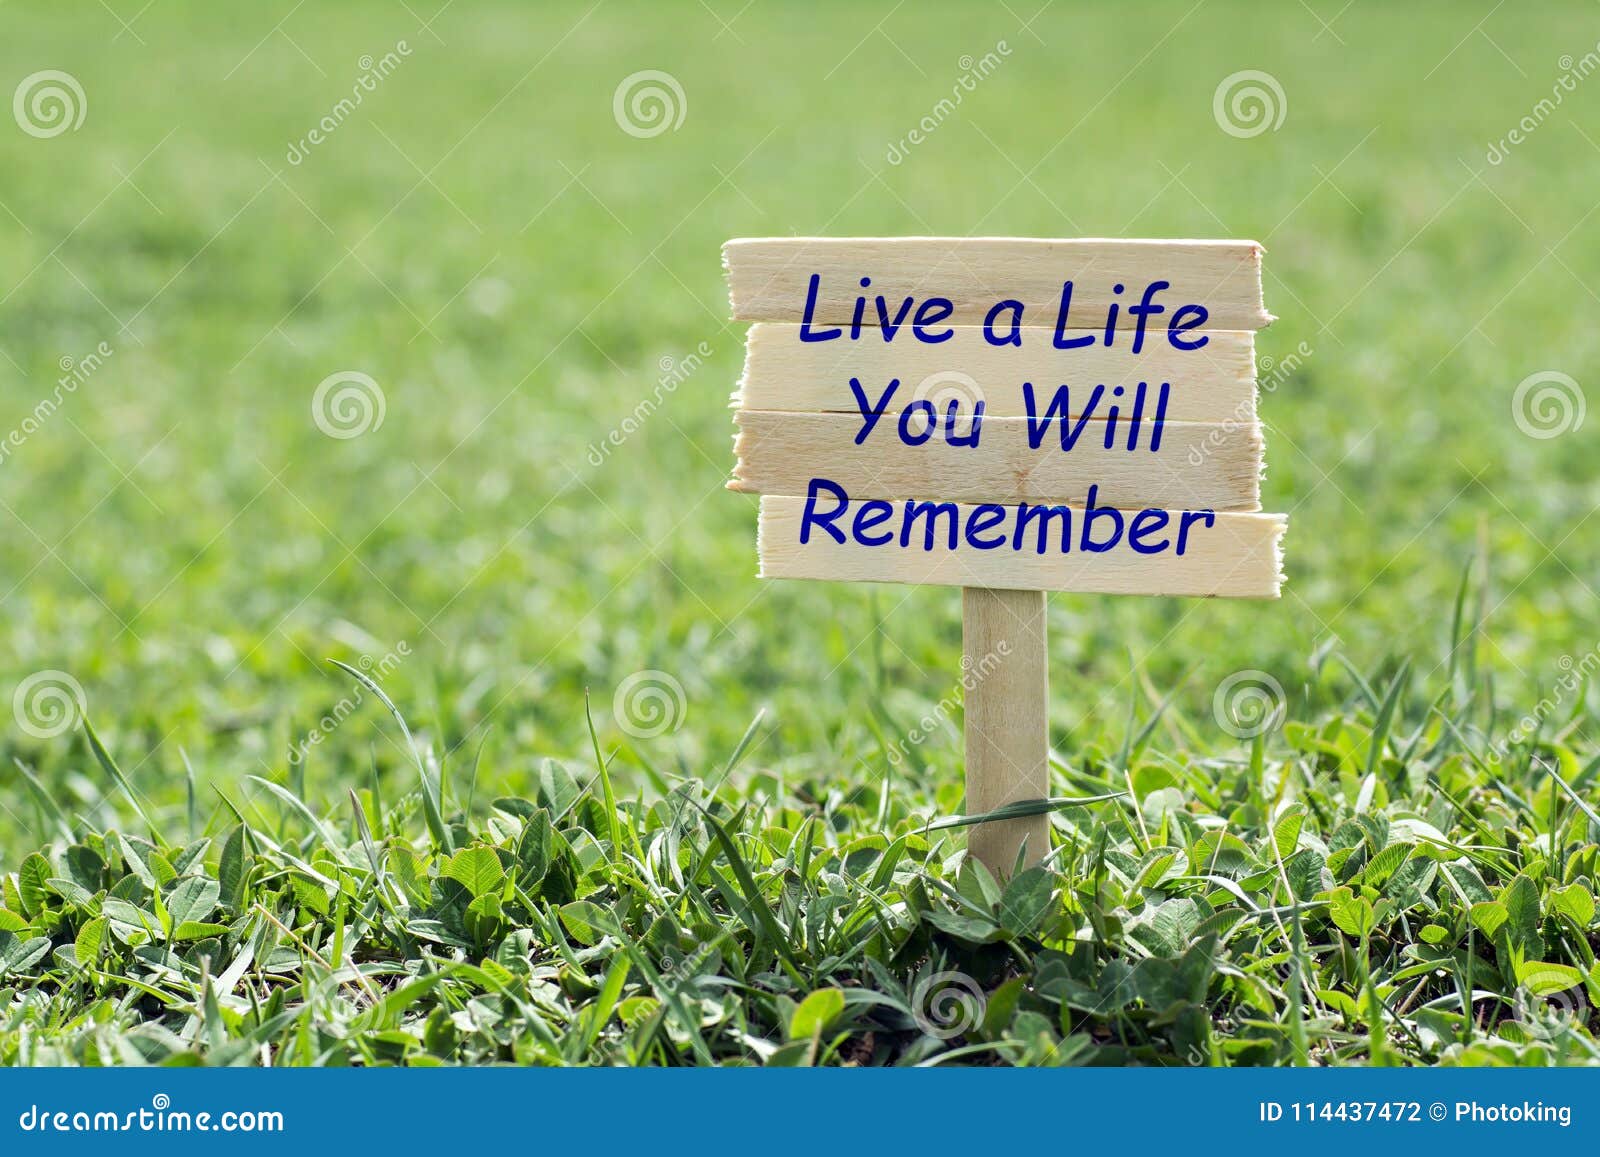 live a life you will remember